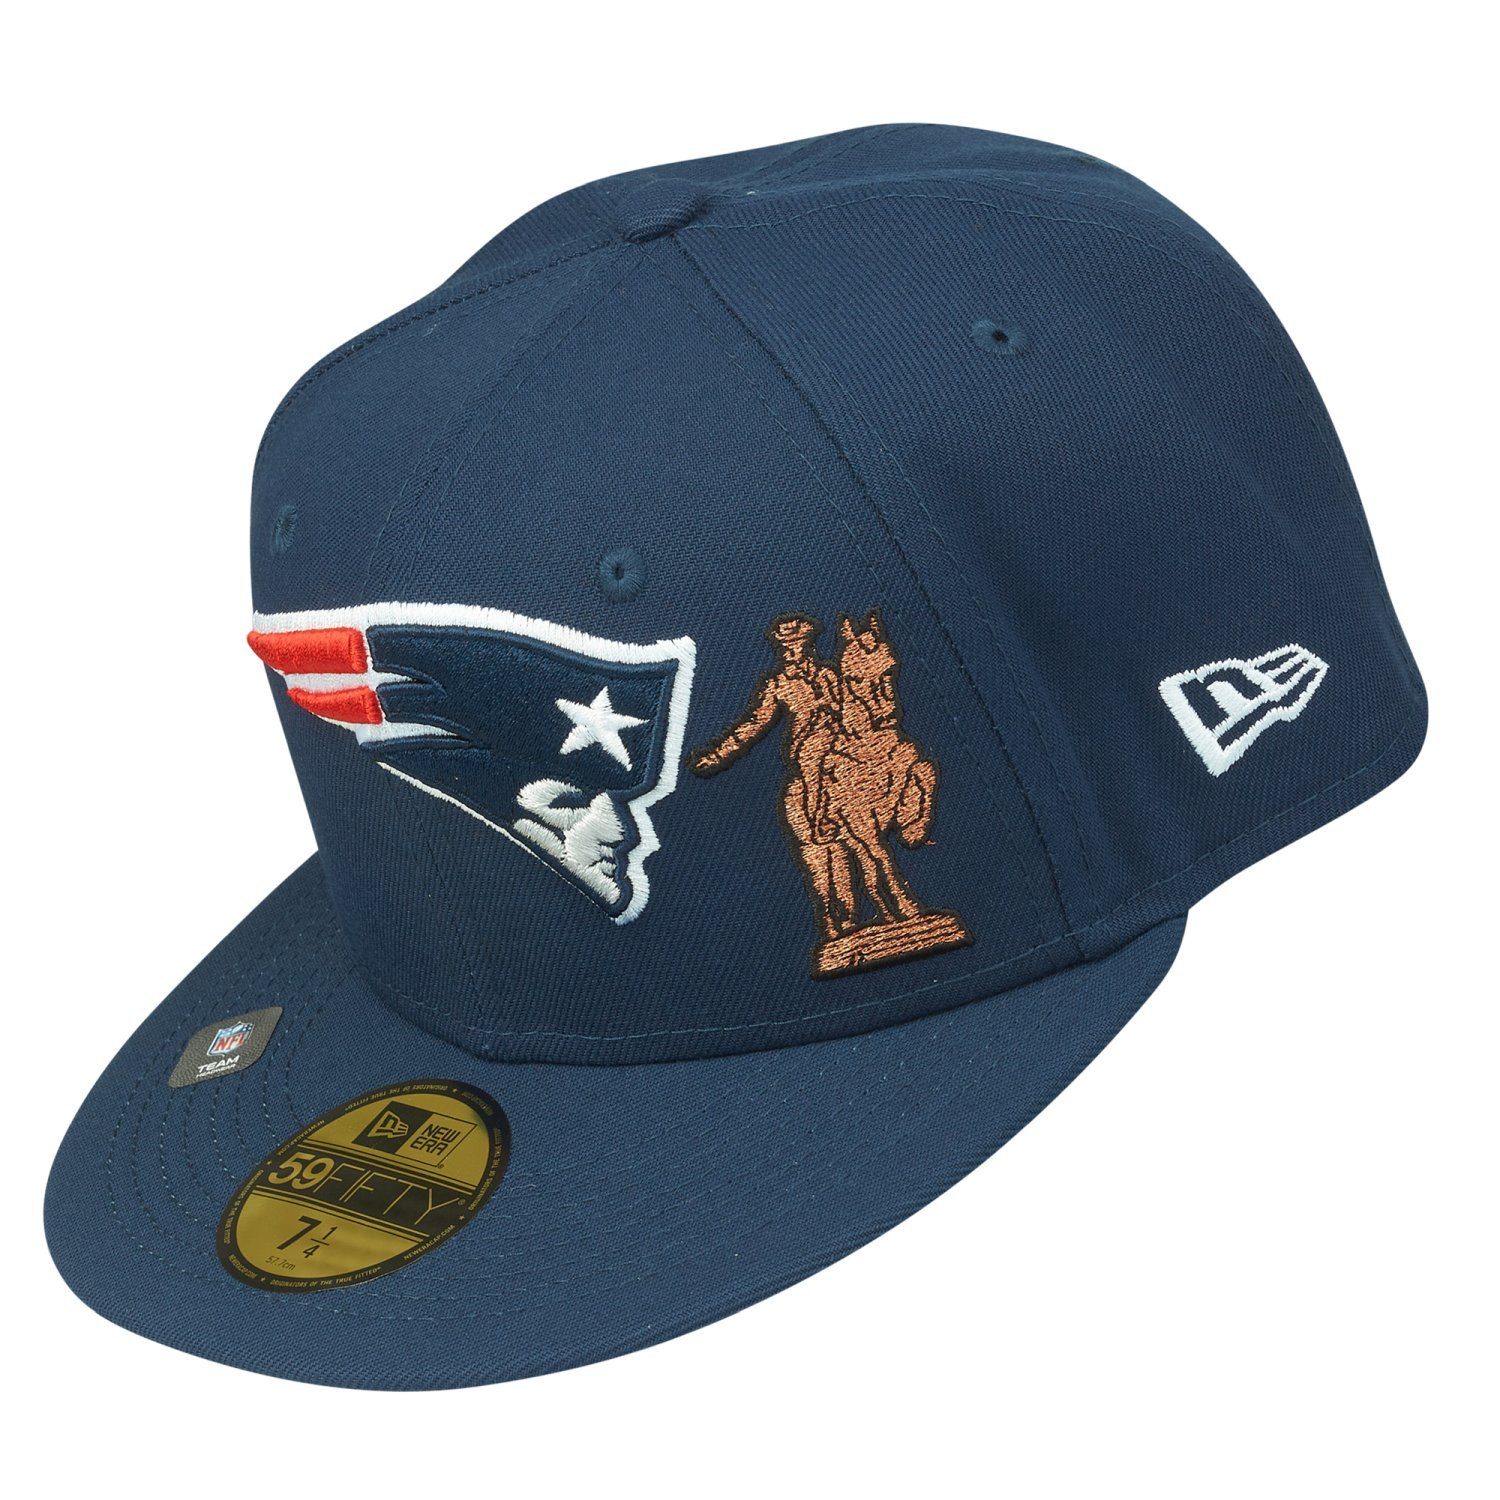 New New Era 59Fifty England Fitted Cap CITY NFL Patriots